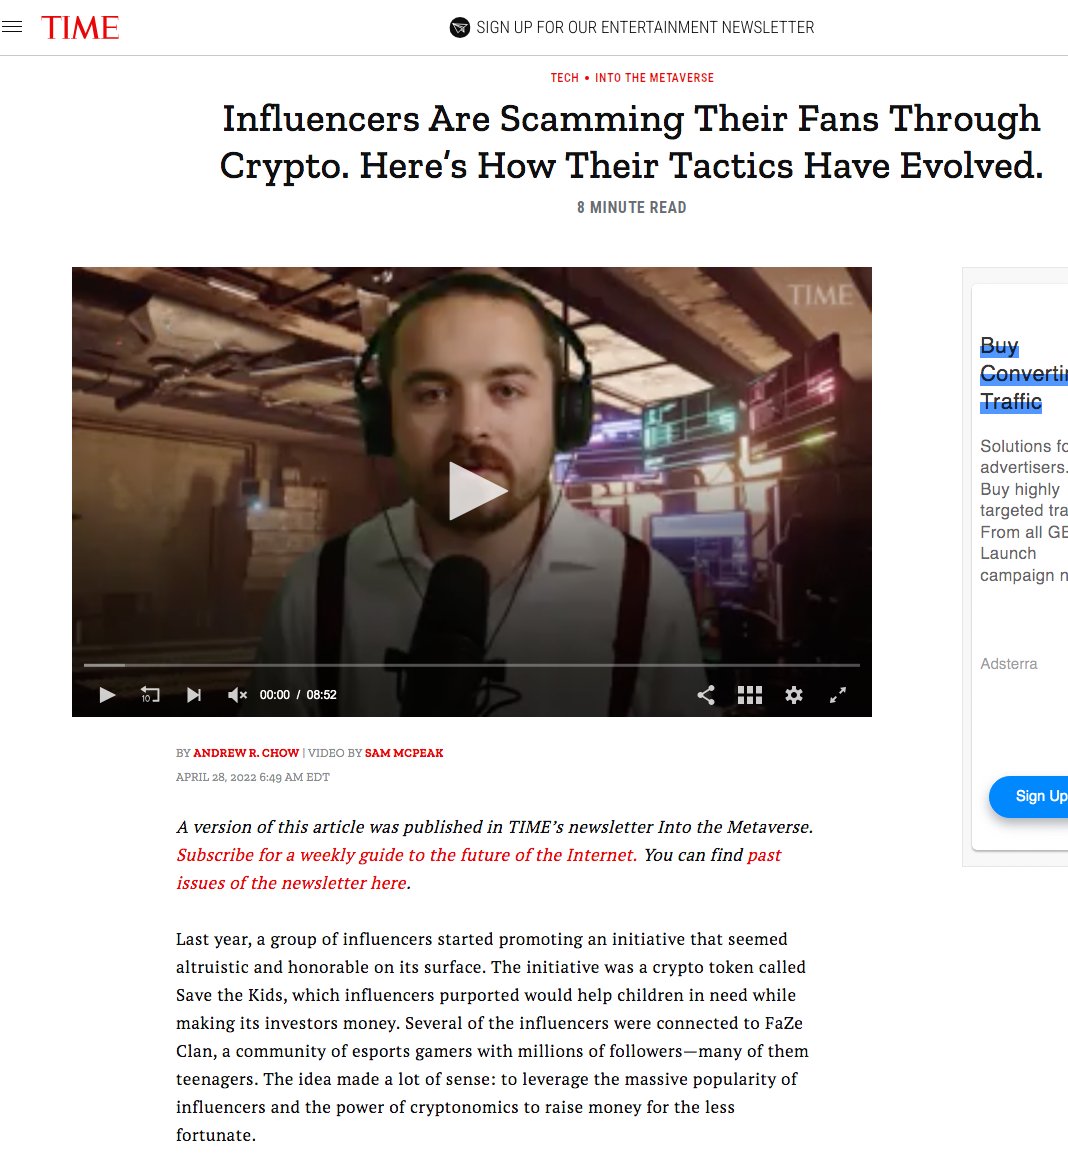 #Influencers are pulling Millions of people into #Crypto SCAMS at record pace. It's become so bad that #AngelInvesting is dropping like a rock. The number of different types of scams are growing, & organized crime in the sector has Skyrocketed. Watch out
time.com/6171307/influe…